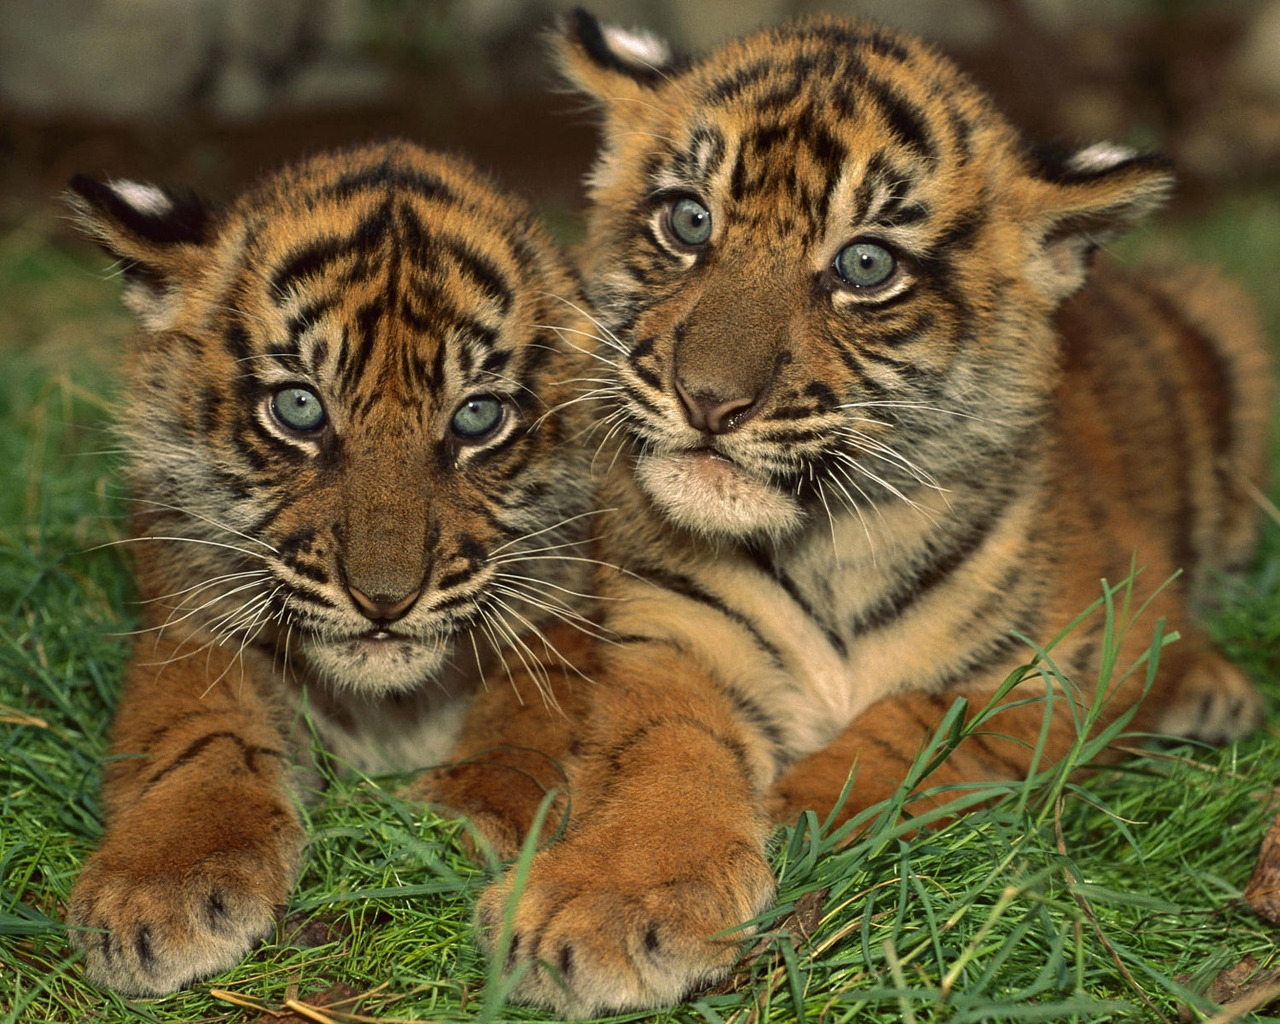 Two Young Tigers for 1280 x 1024 resolution